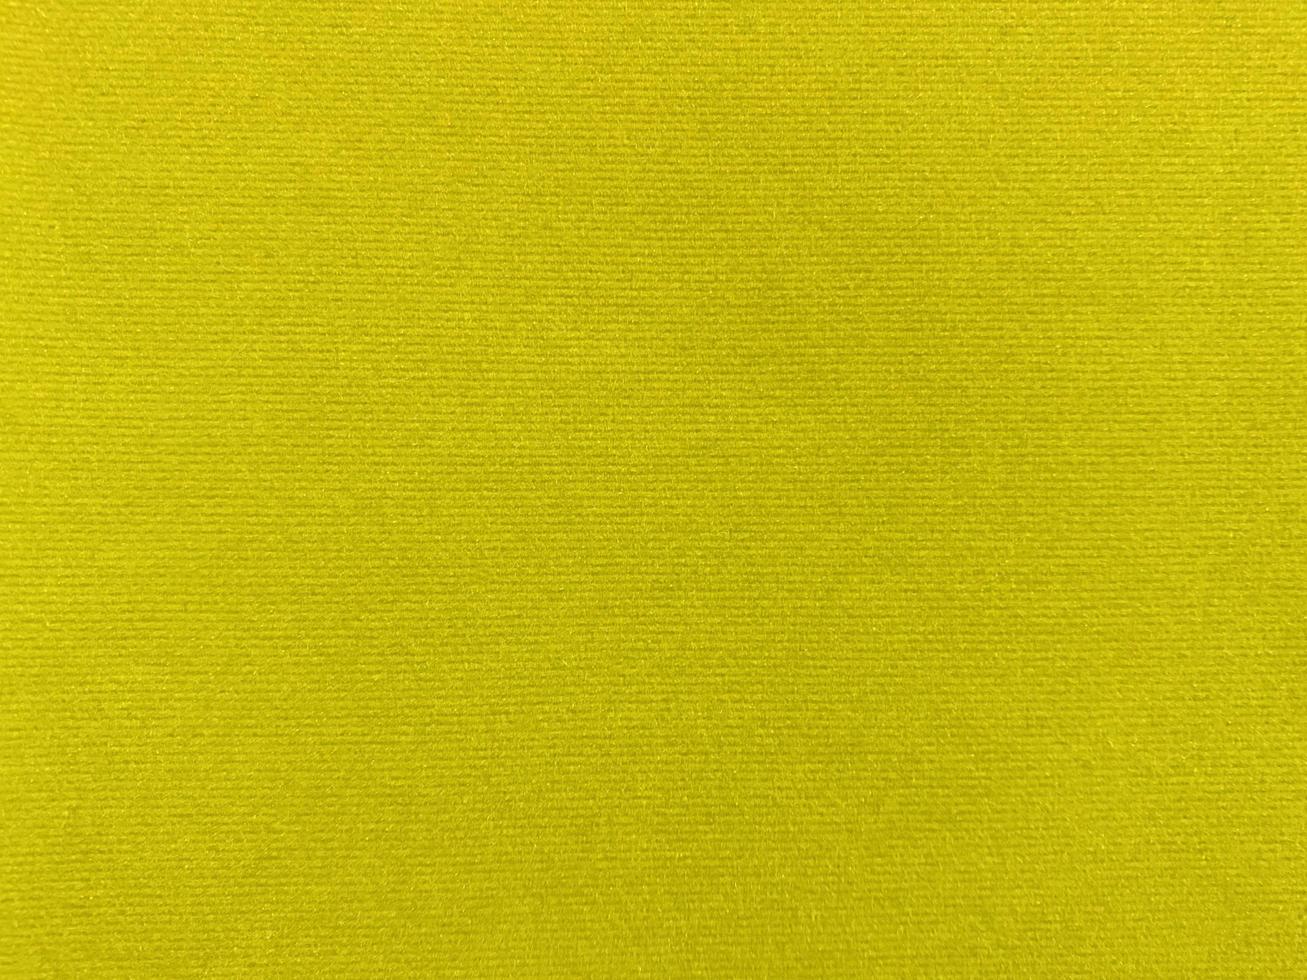 yellow velvet fabric texture used as background. Empty yellow fabric background of soft and smooth textile material. There is space for text.. photo